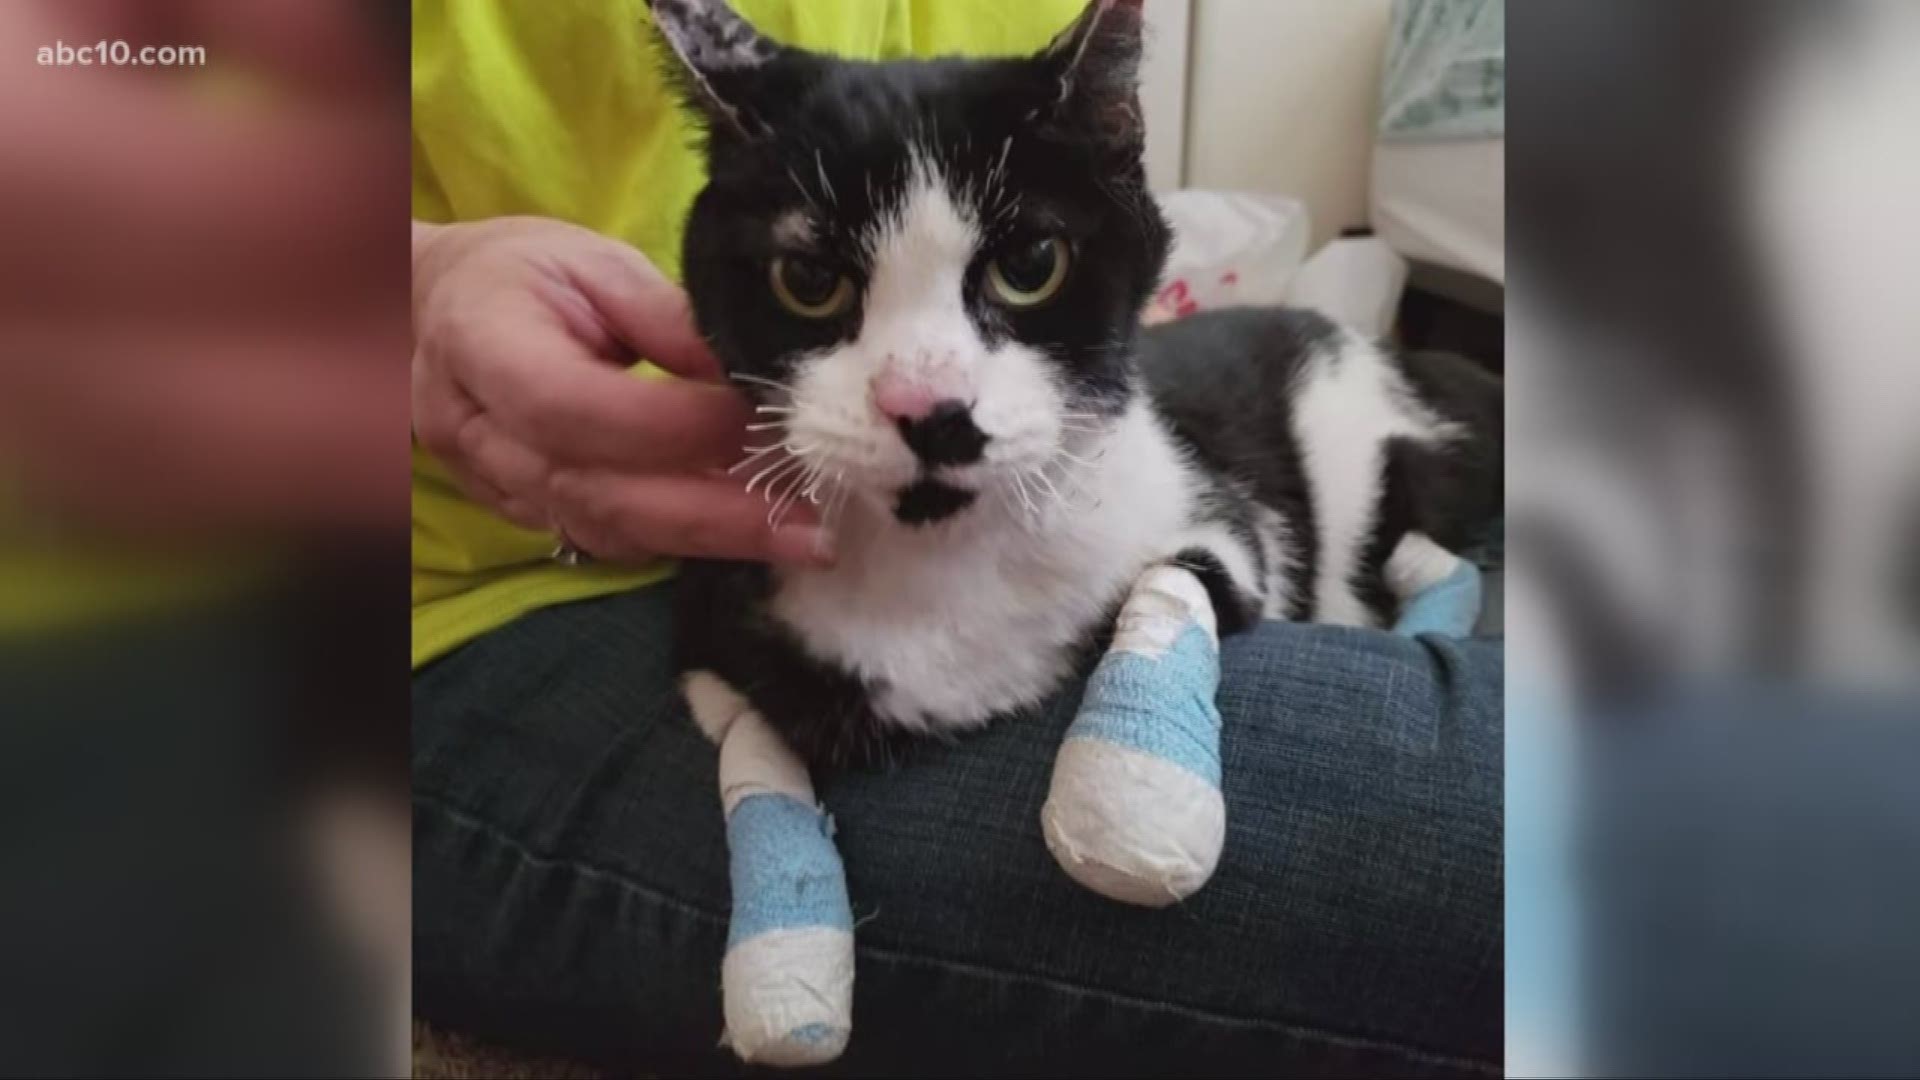 He was hiding in a crack between steps near a creek. His paws were burned and his whiskers singed, but he will be okay.